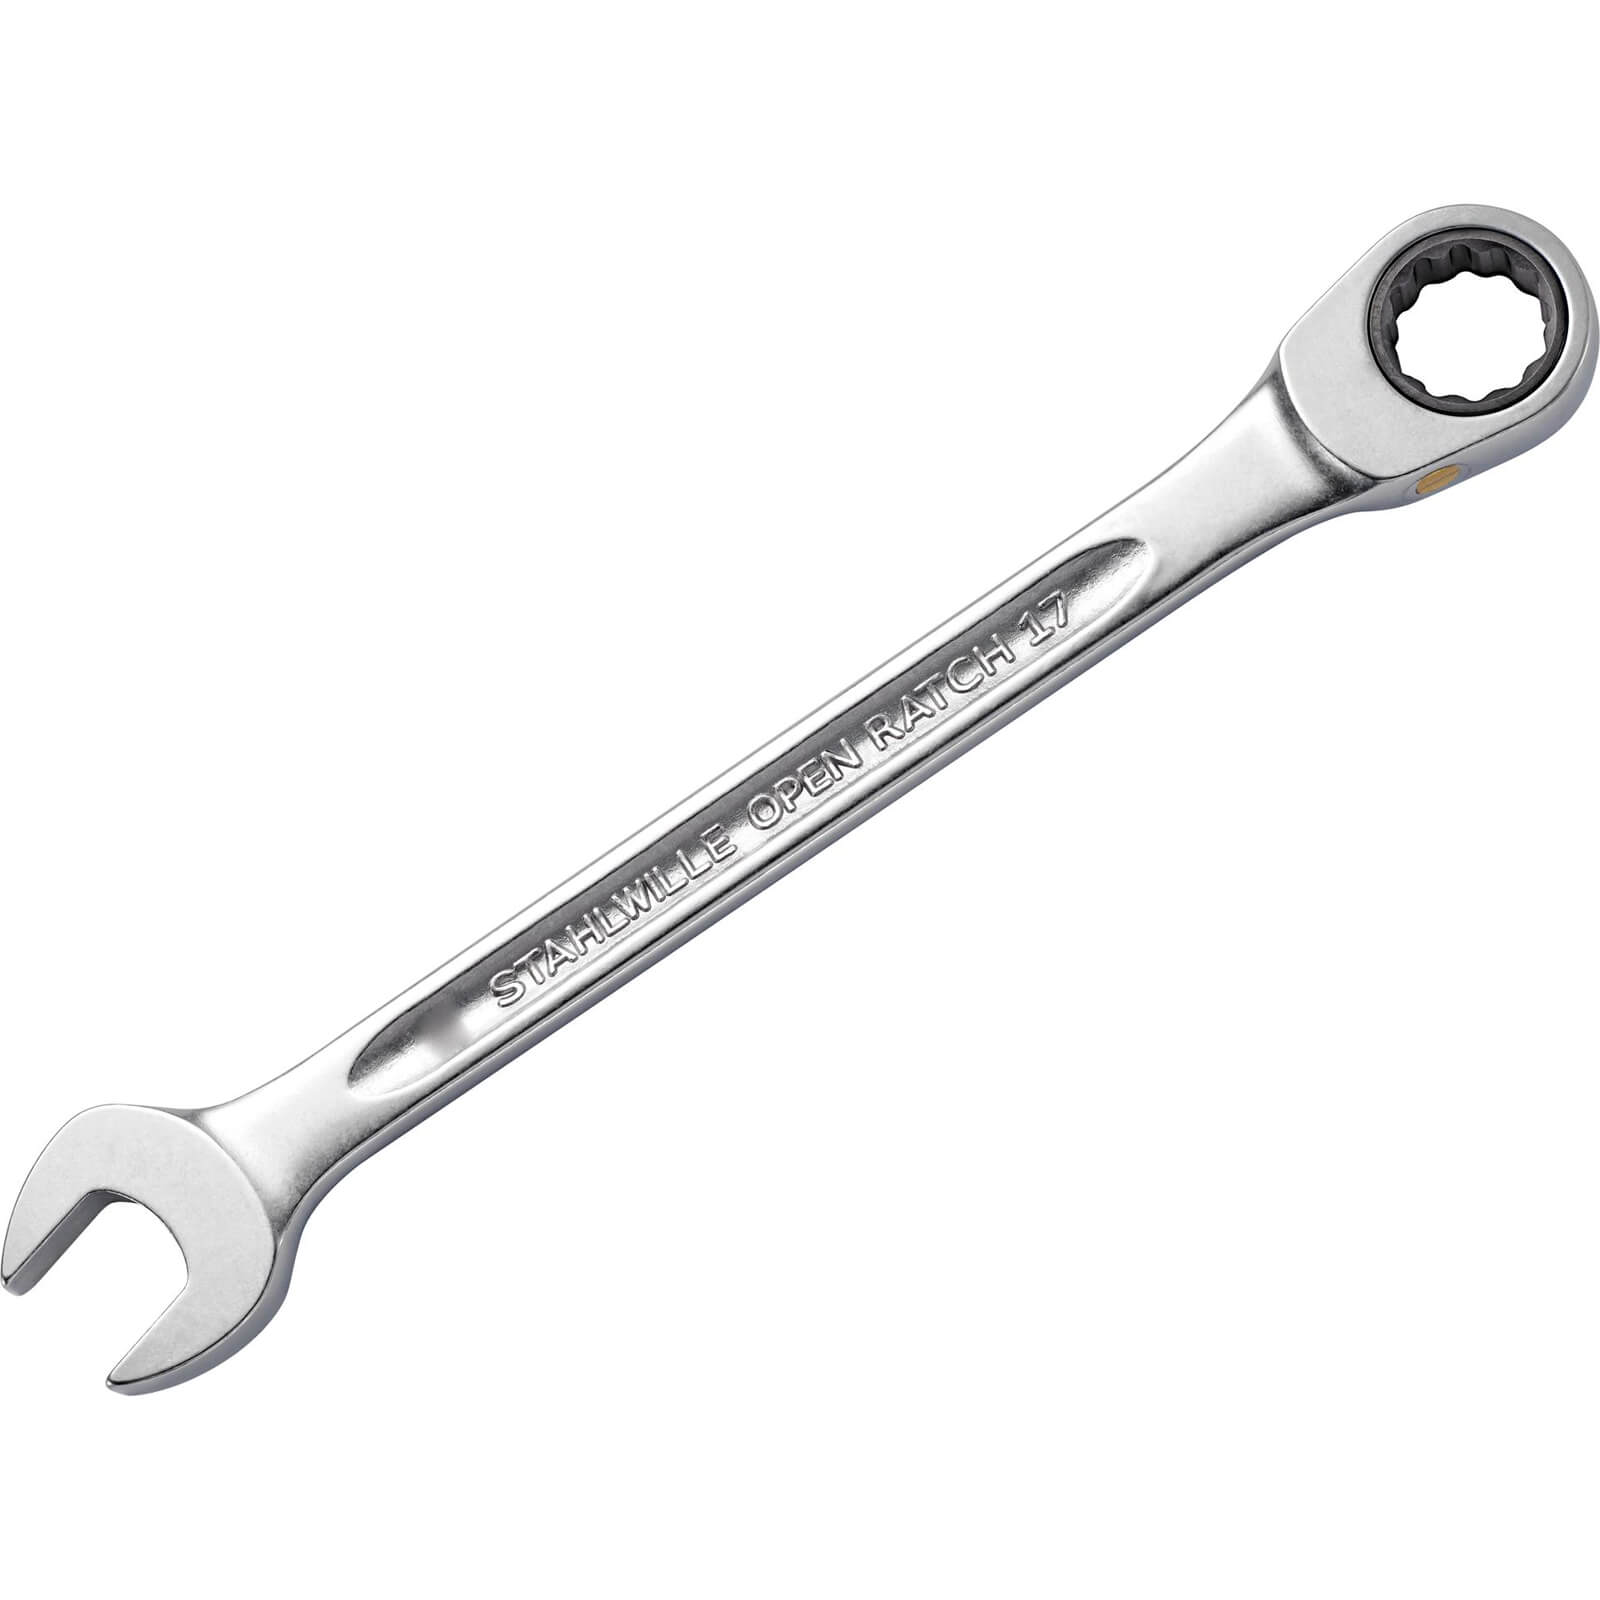 Image of Stahlwille 17F Ratchet Combination Spanner 9mm